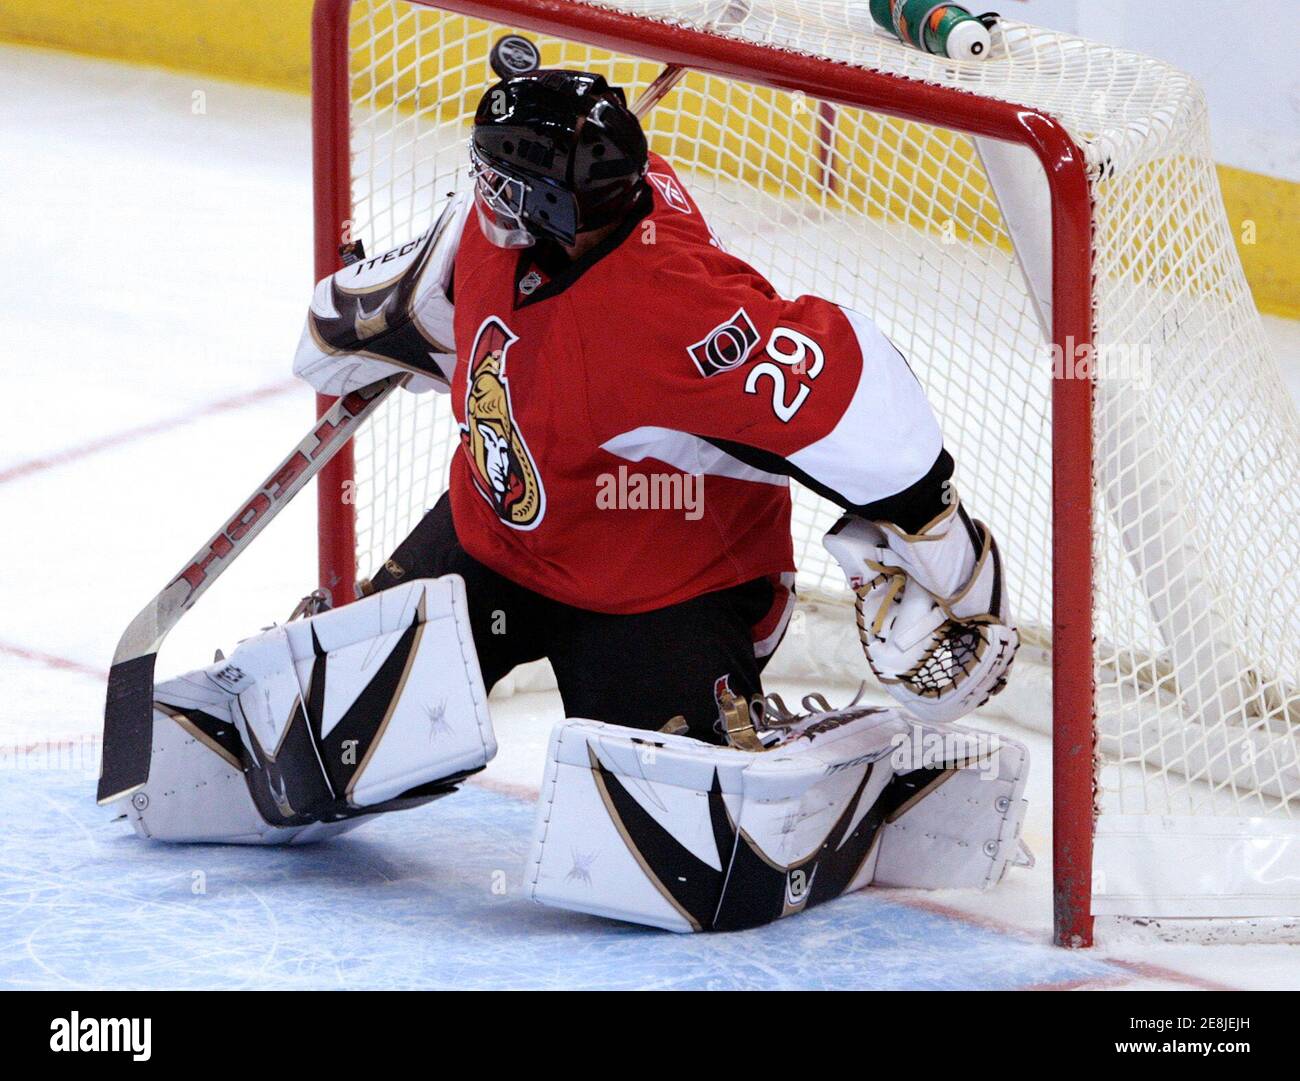 Ottawa Senators goaltender Martin Gerber concedes a goal by Buffalo Sabres  Jochen Hecht (not pictured) during the first period of their NHL hockey  game in Ottawa November 15, 2007. REUTERS/Christopher Pike (CANADA